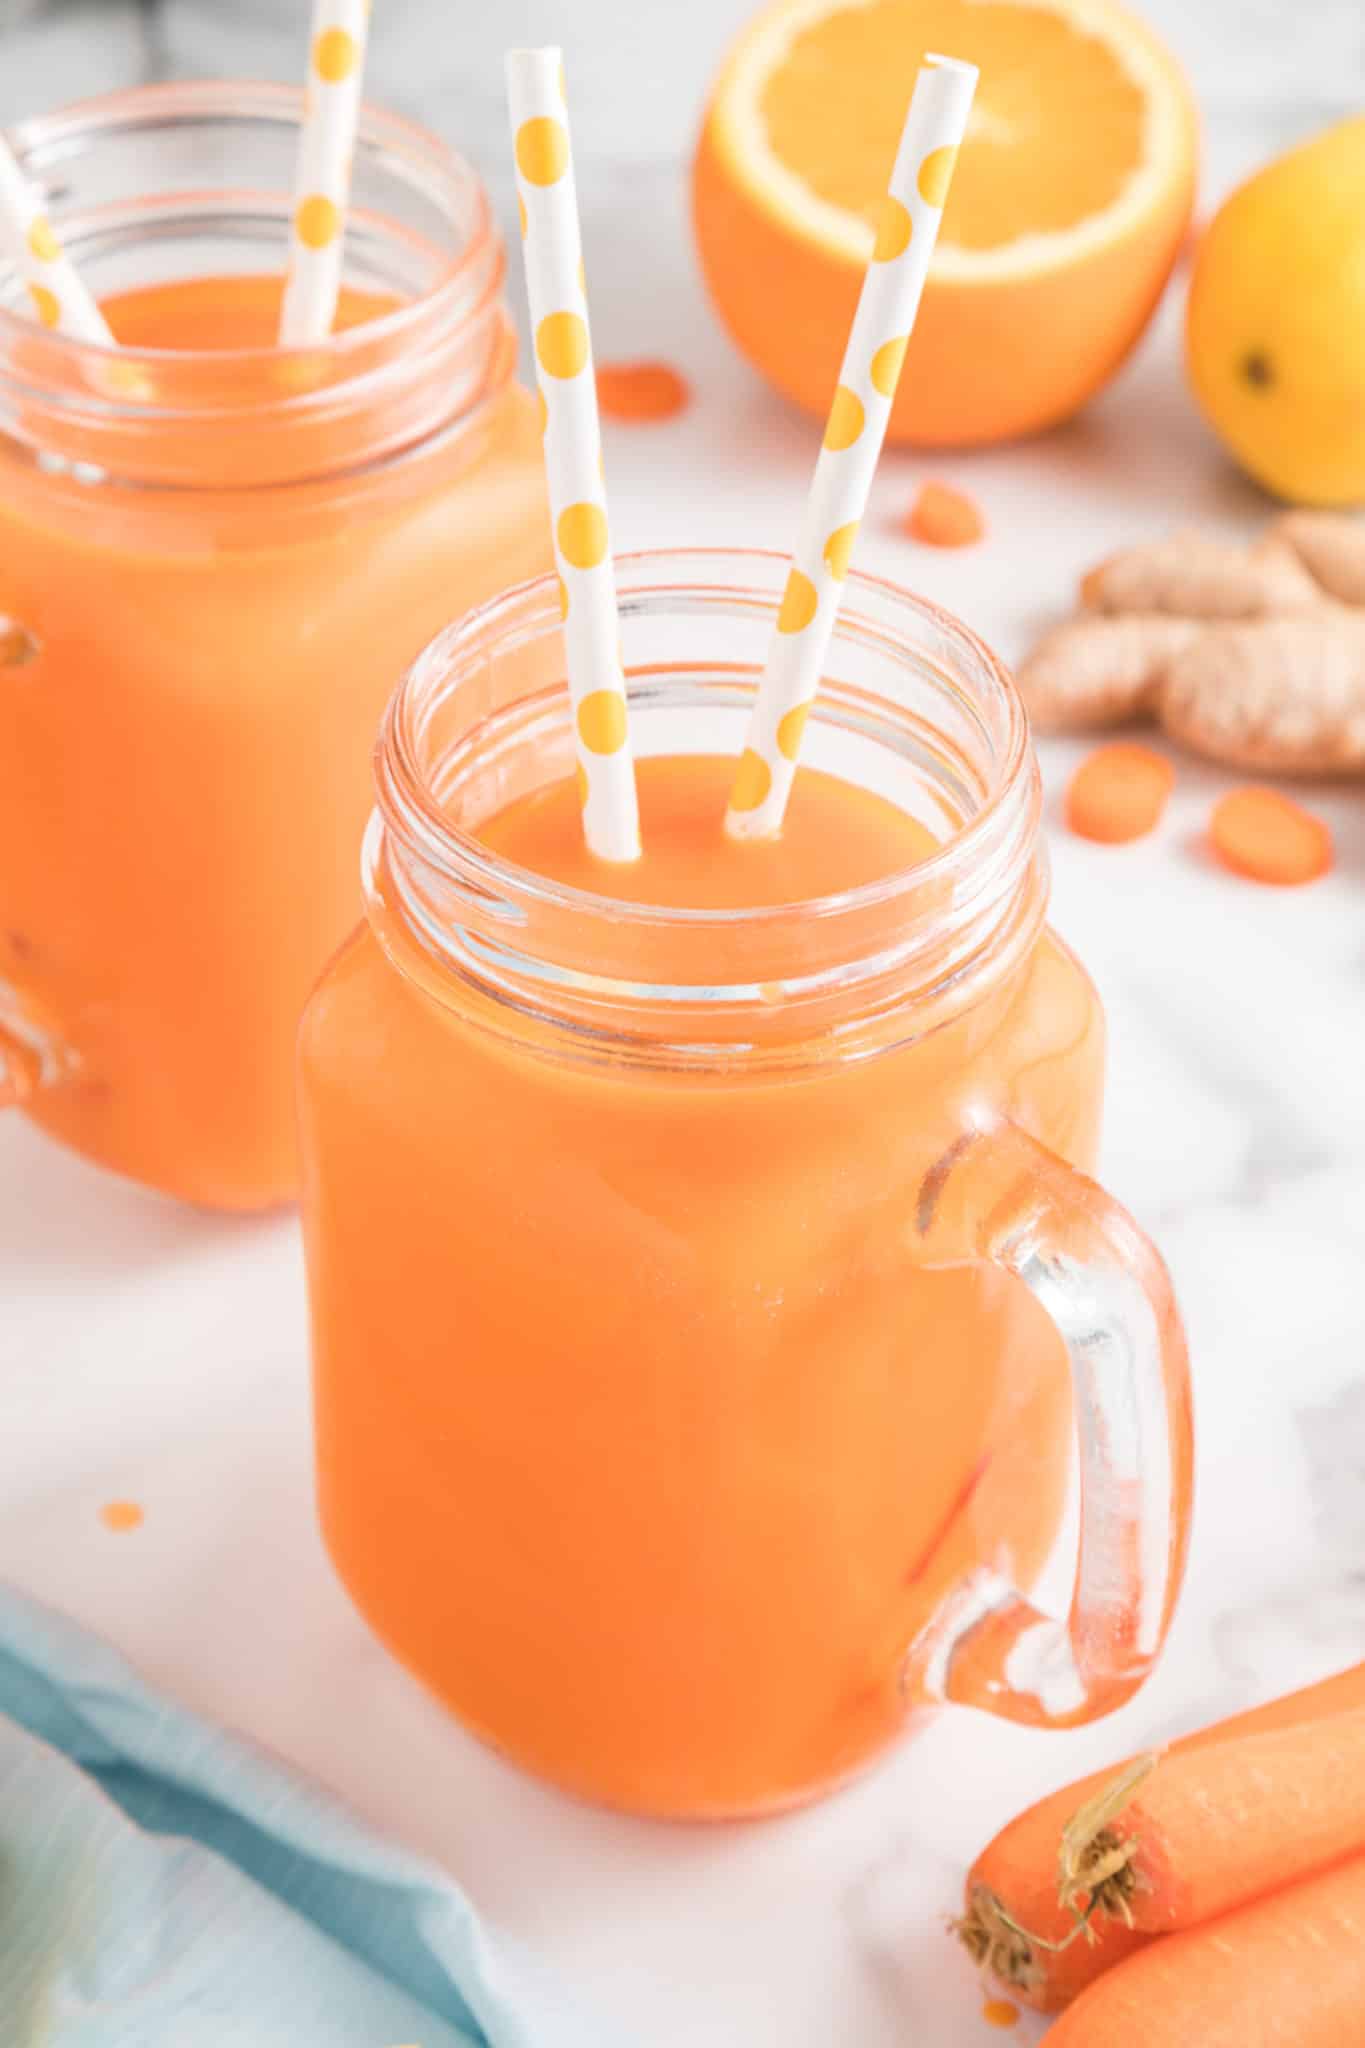 Two mason jar mugs with carrot juice, each has two straws.